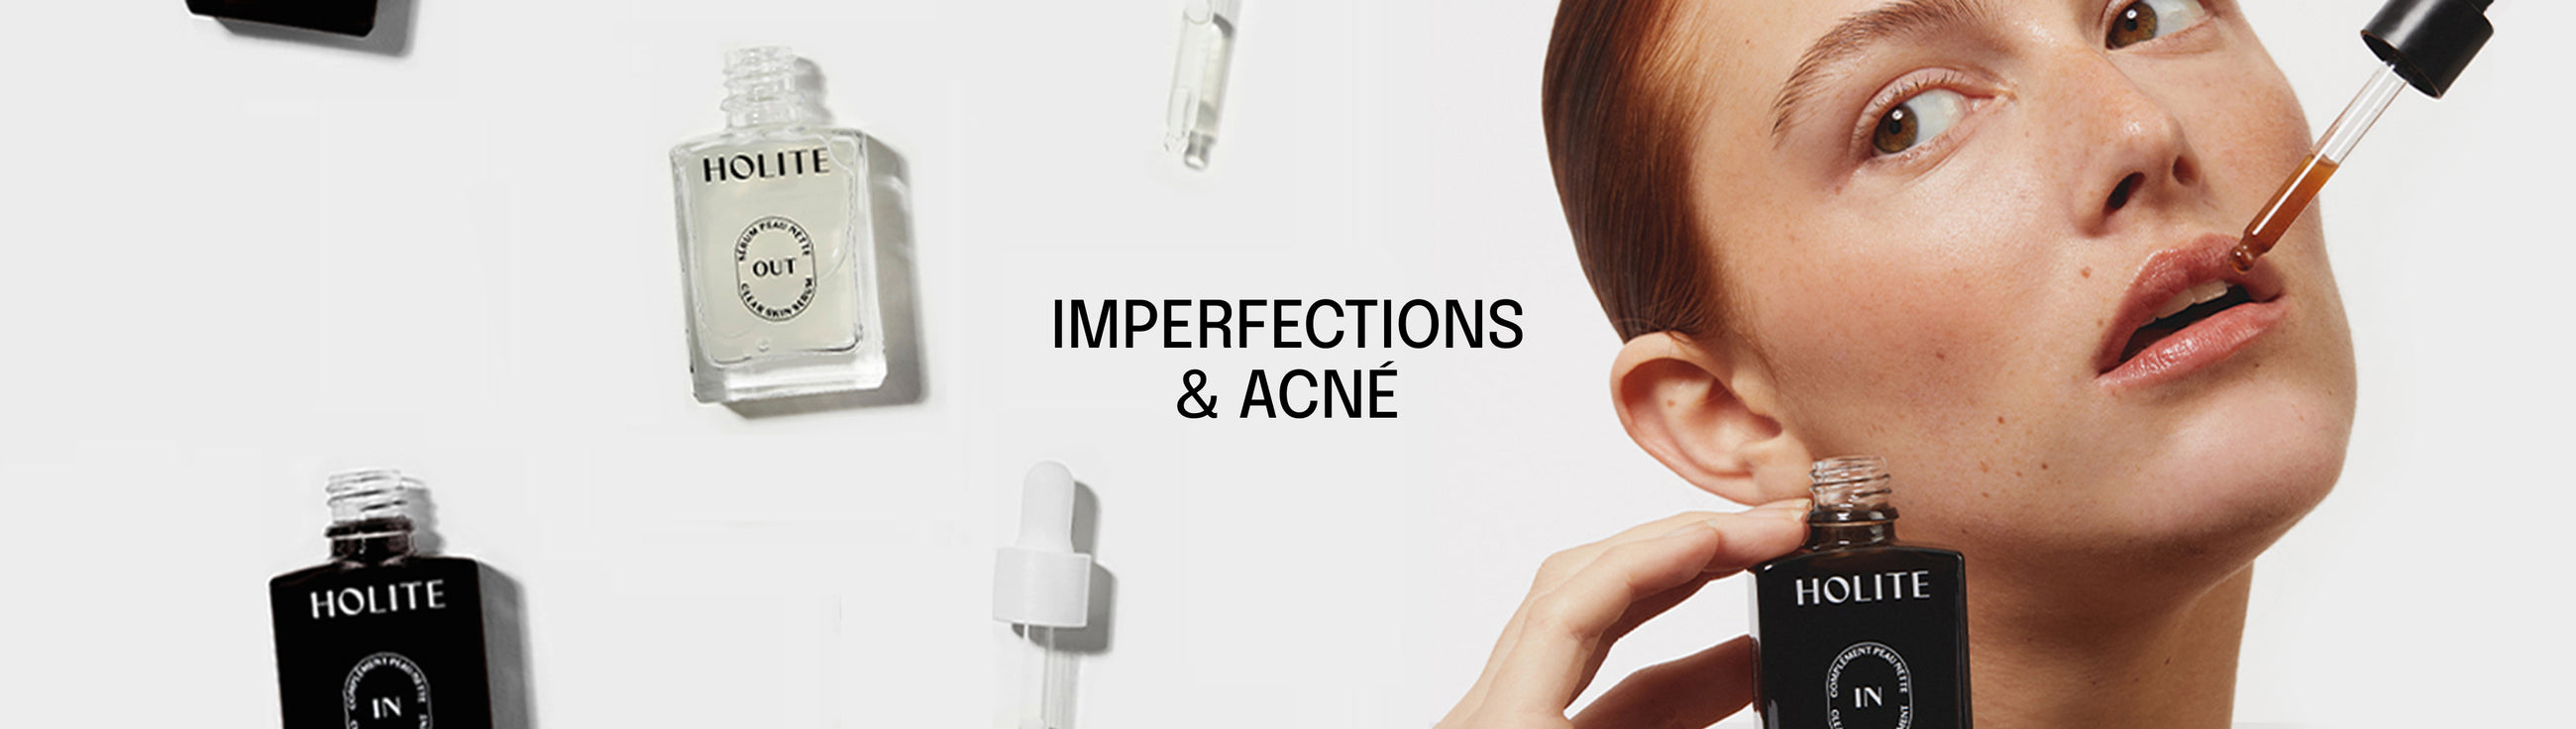 Imperfections & Acné